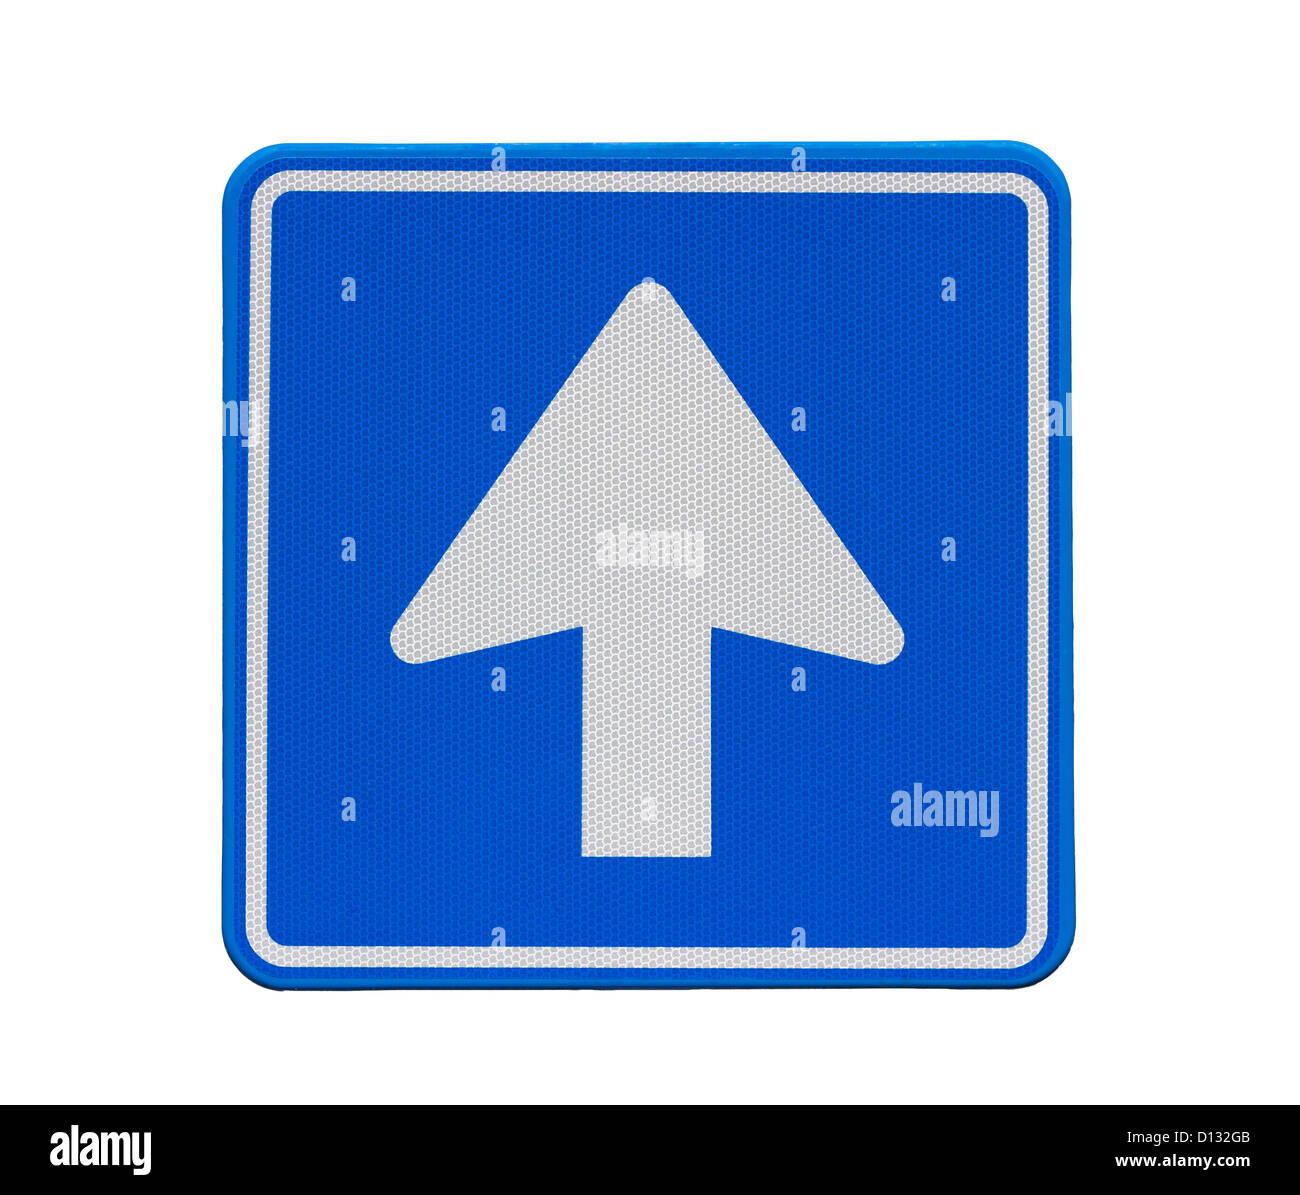 Blue Square road sign : one way traffic Banque D'Images